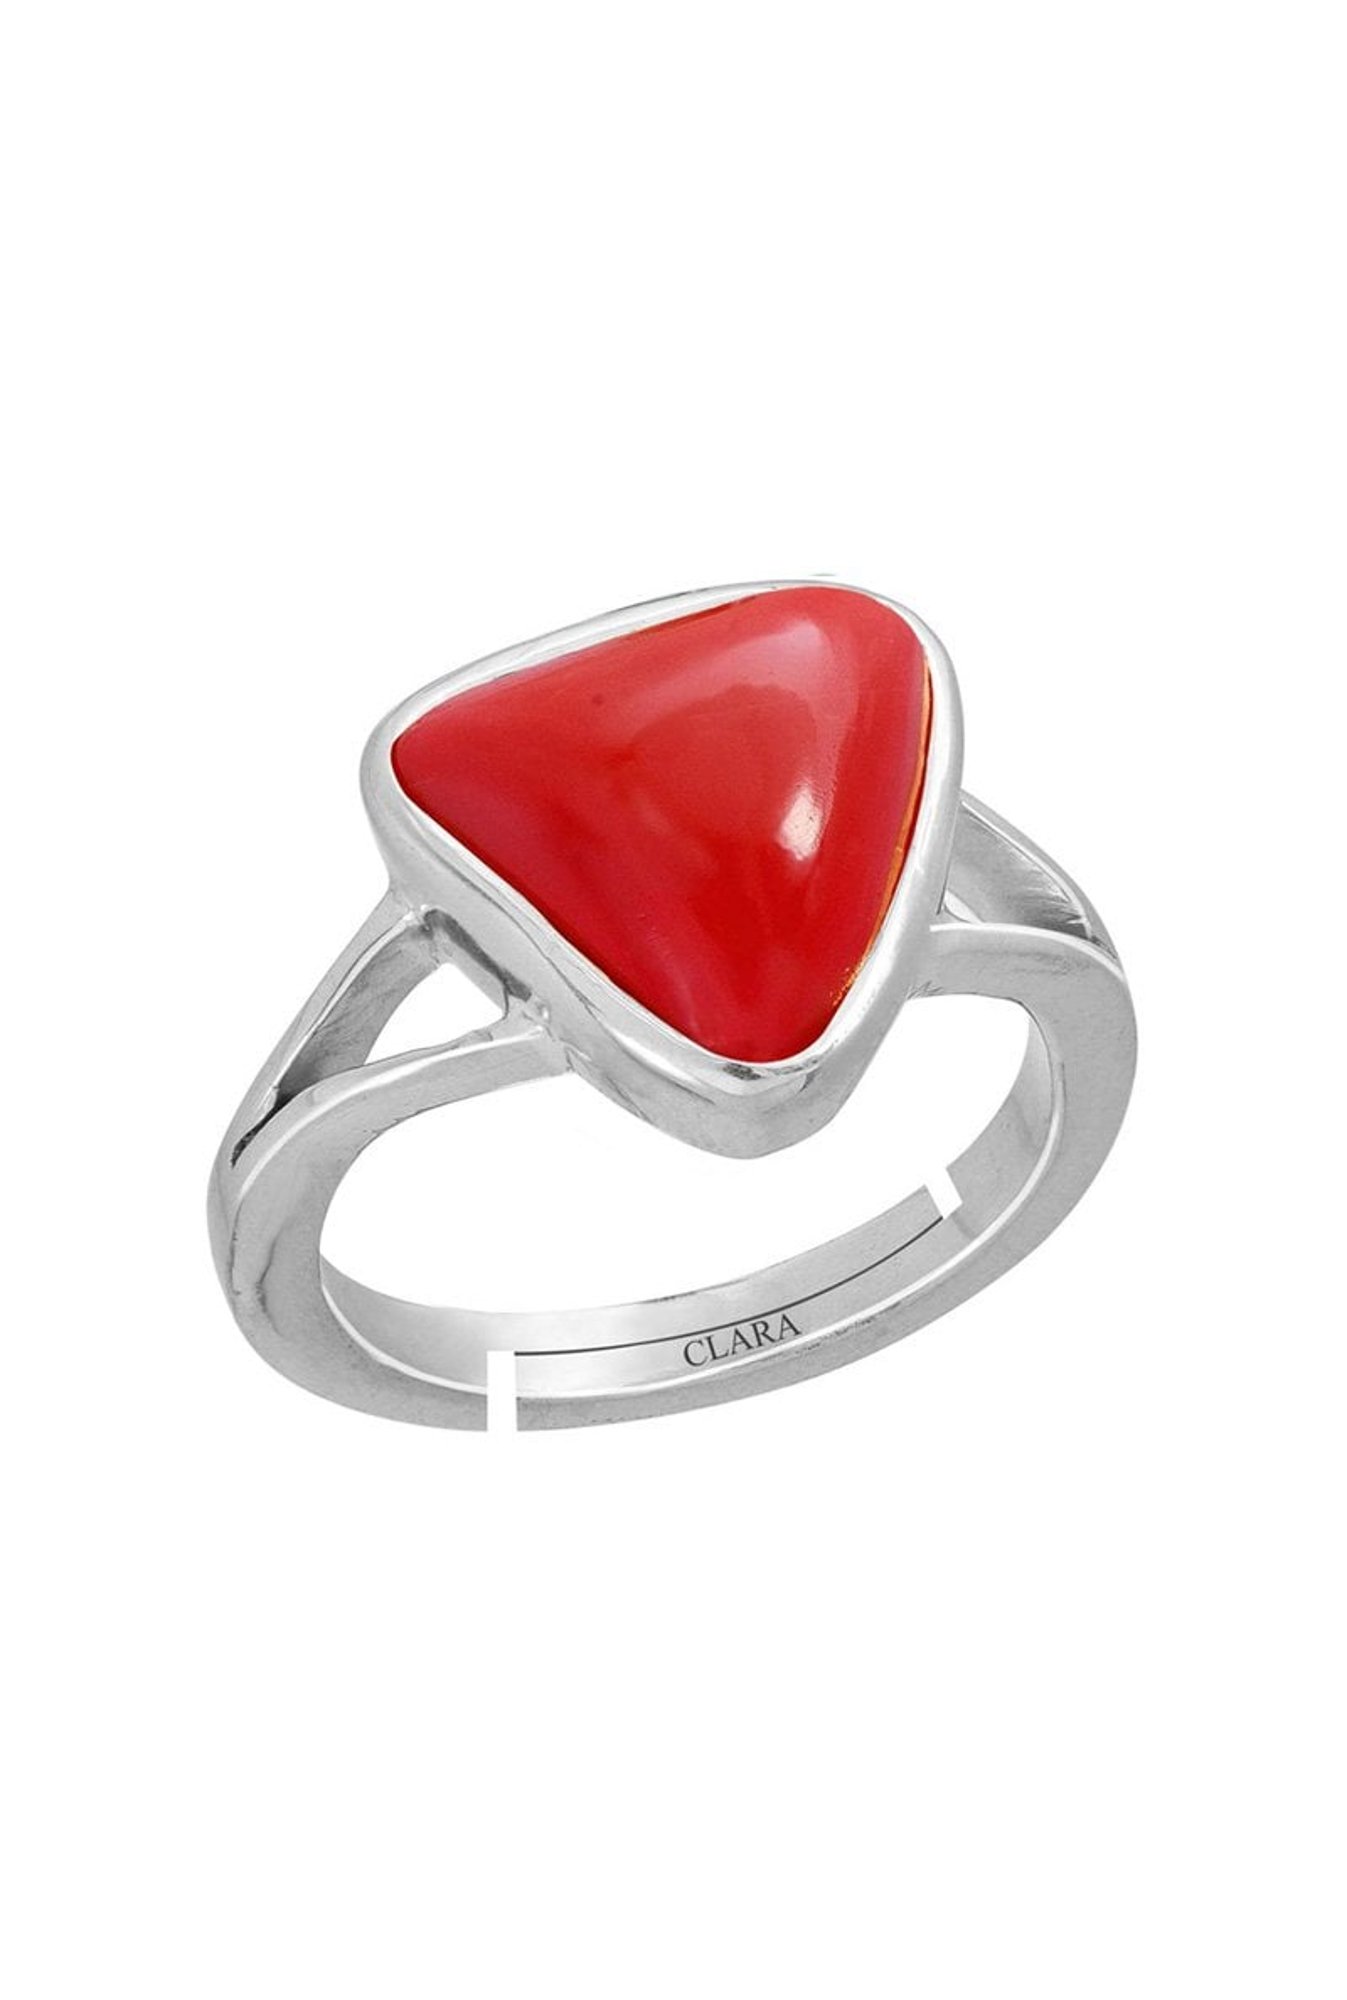 Red Coral Moonga 4.00 Ratti 2.25 Carat Gemstone Ring For Men And Women With  Lab Certified-